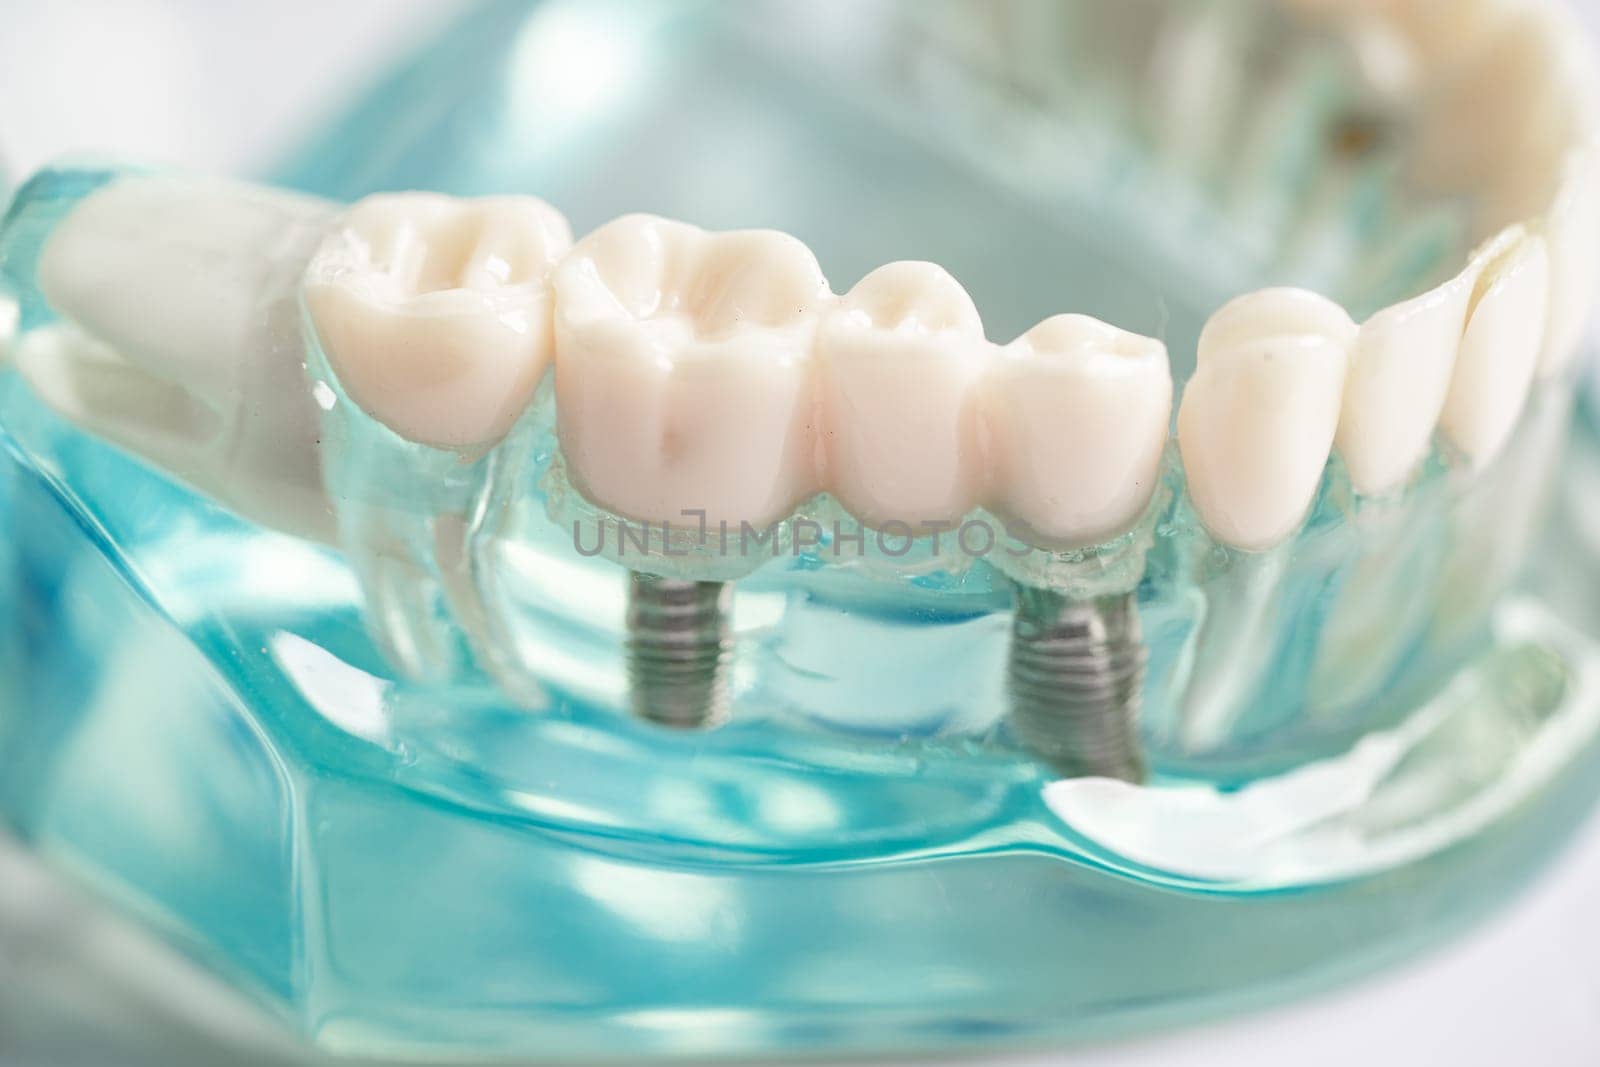 Dental implant, artificial tooth roots into jaw, root canal of dental treatment, gum disease, teeth model for dentist studying about dentistry. by pamai